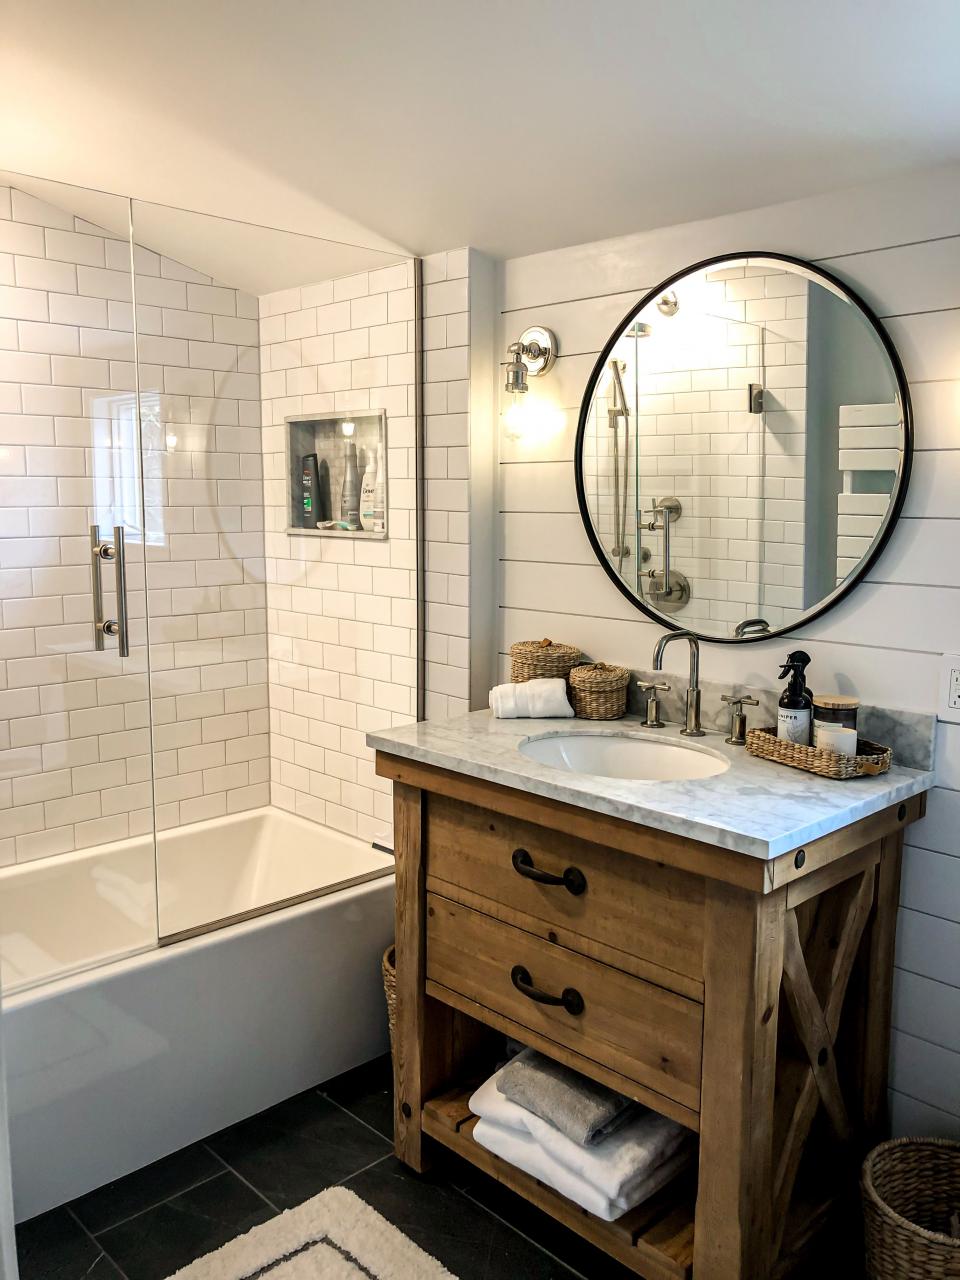 Pottery Barn Bathroom Images barn red color schemes